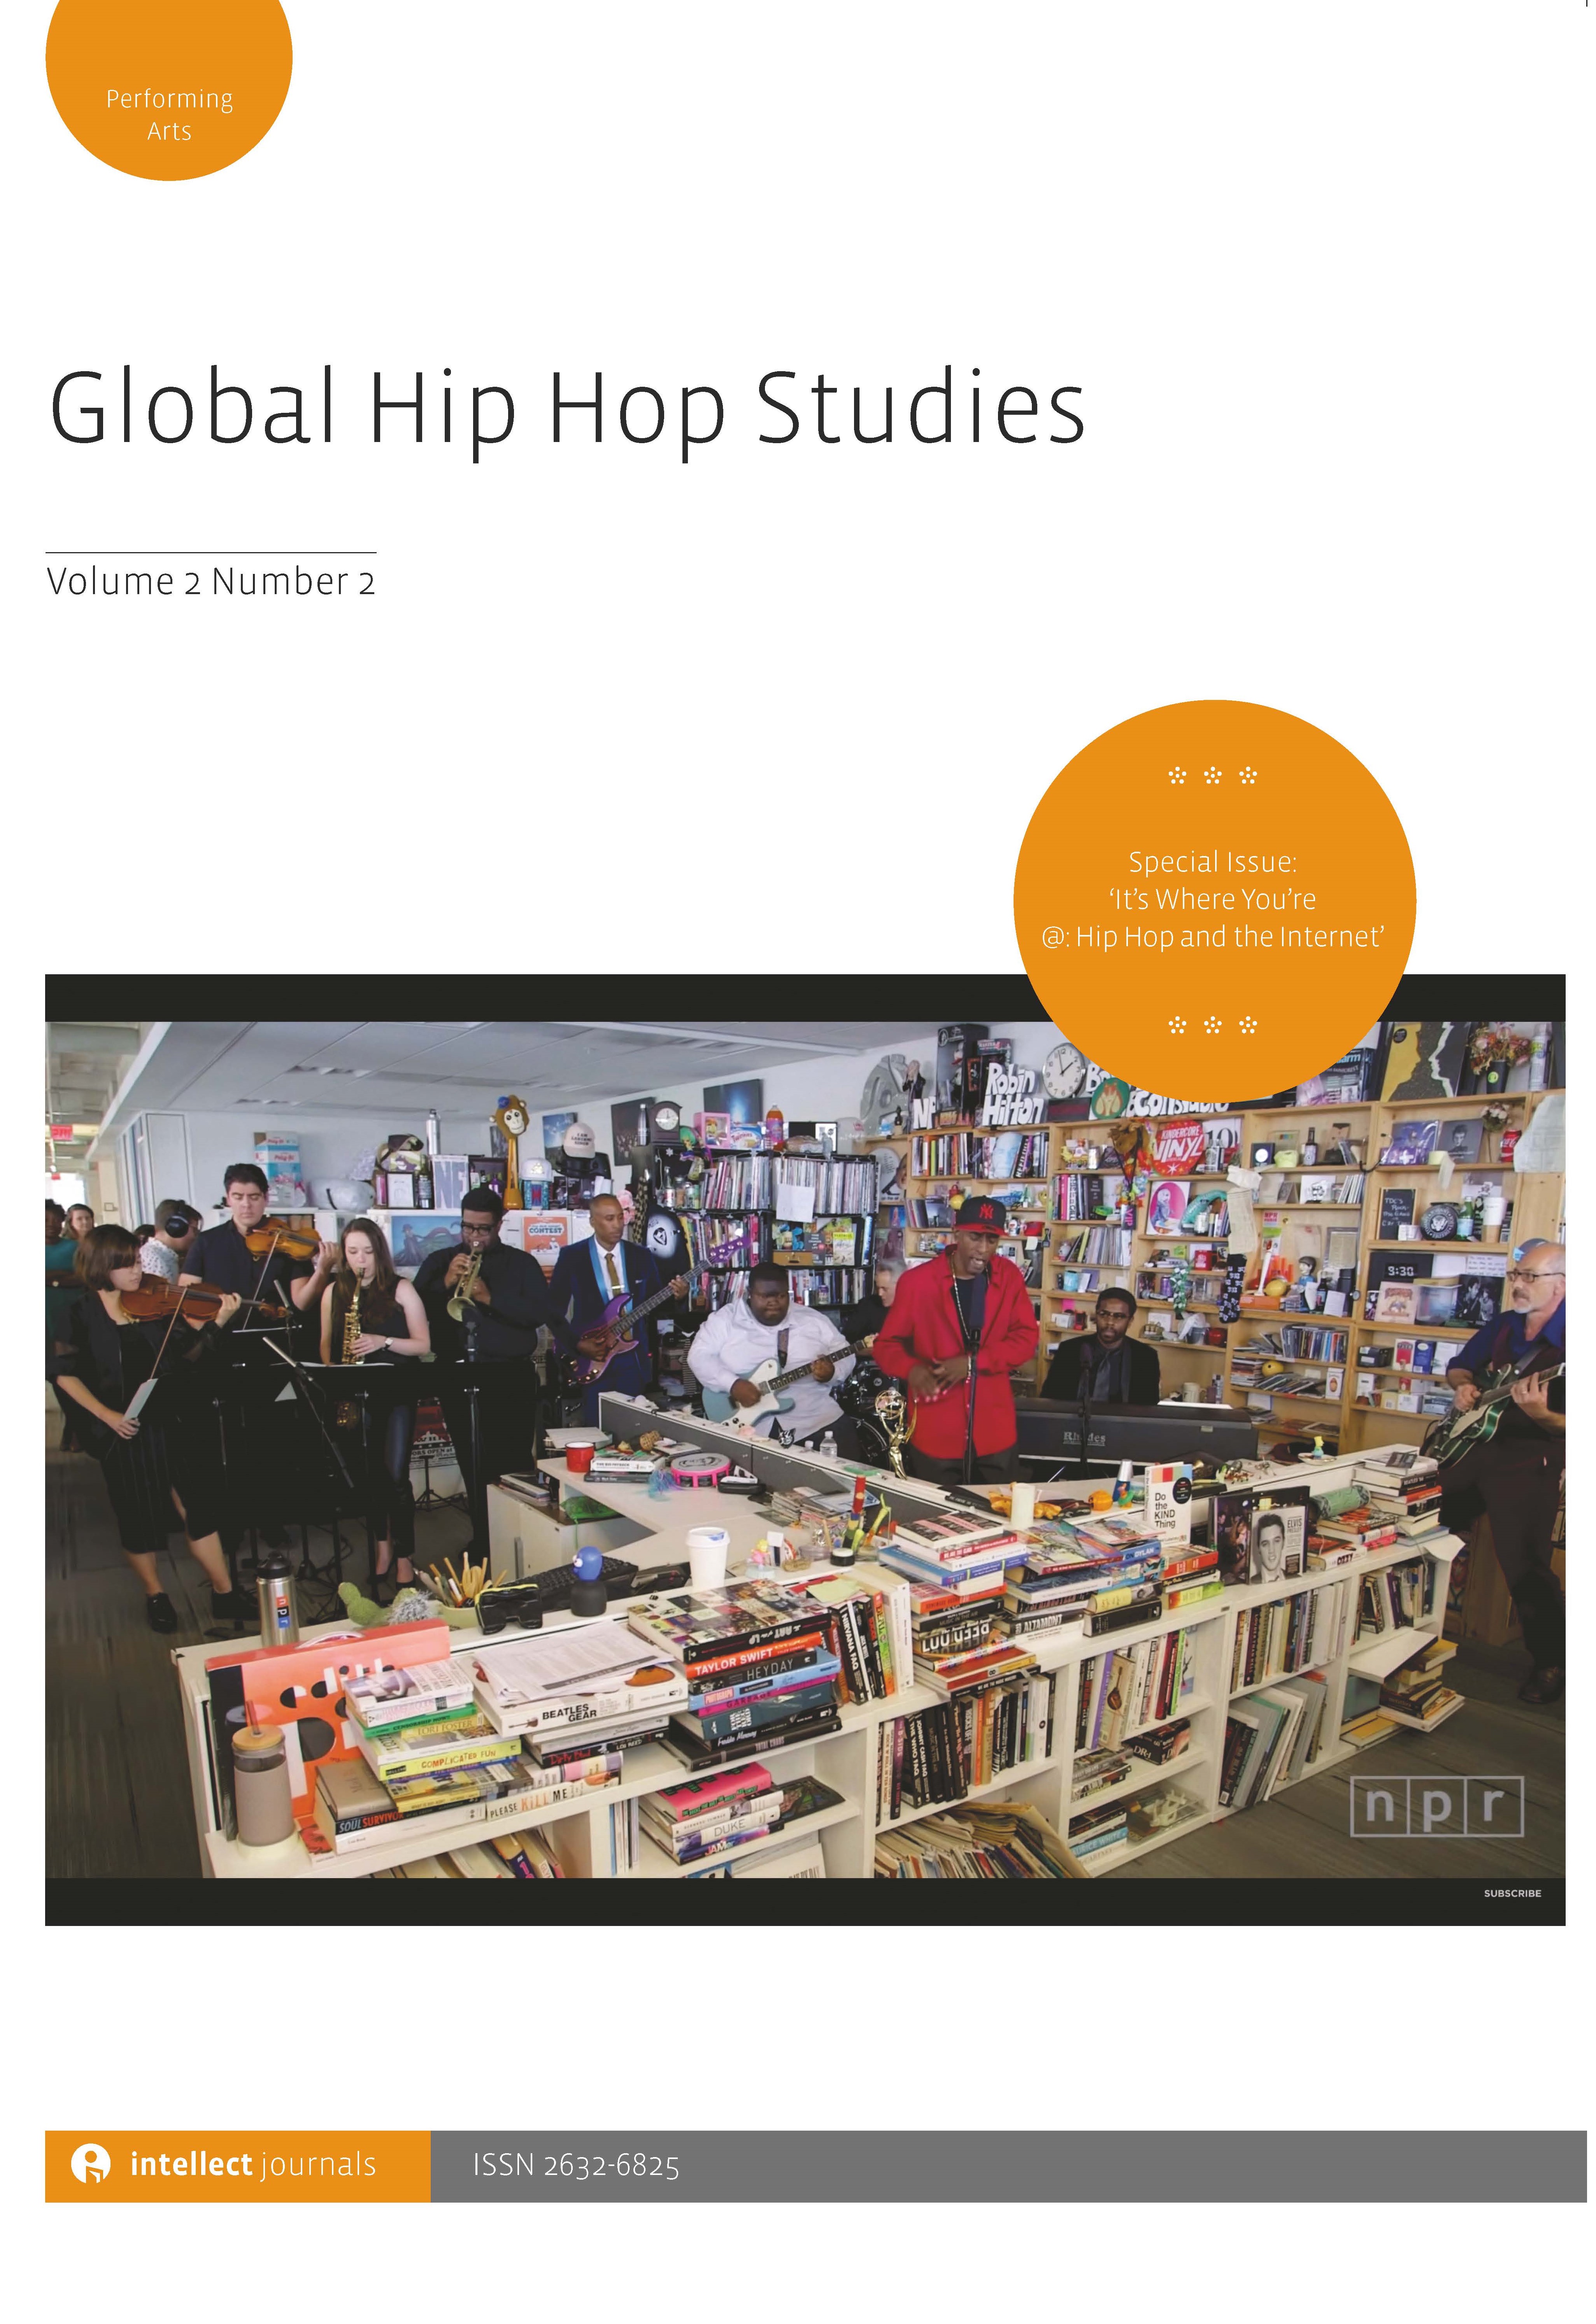 Global Hip Hop Studies 2.2 is out now and Open Access! Special Issue